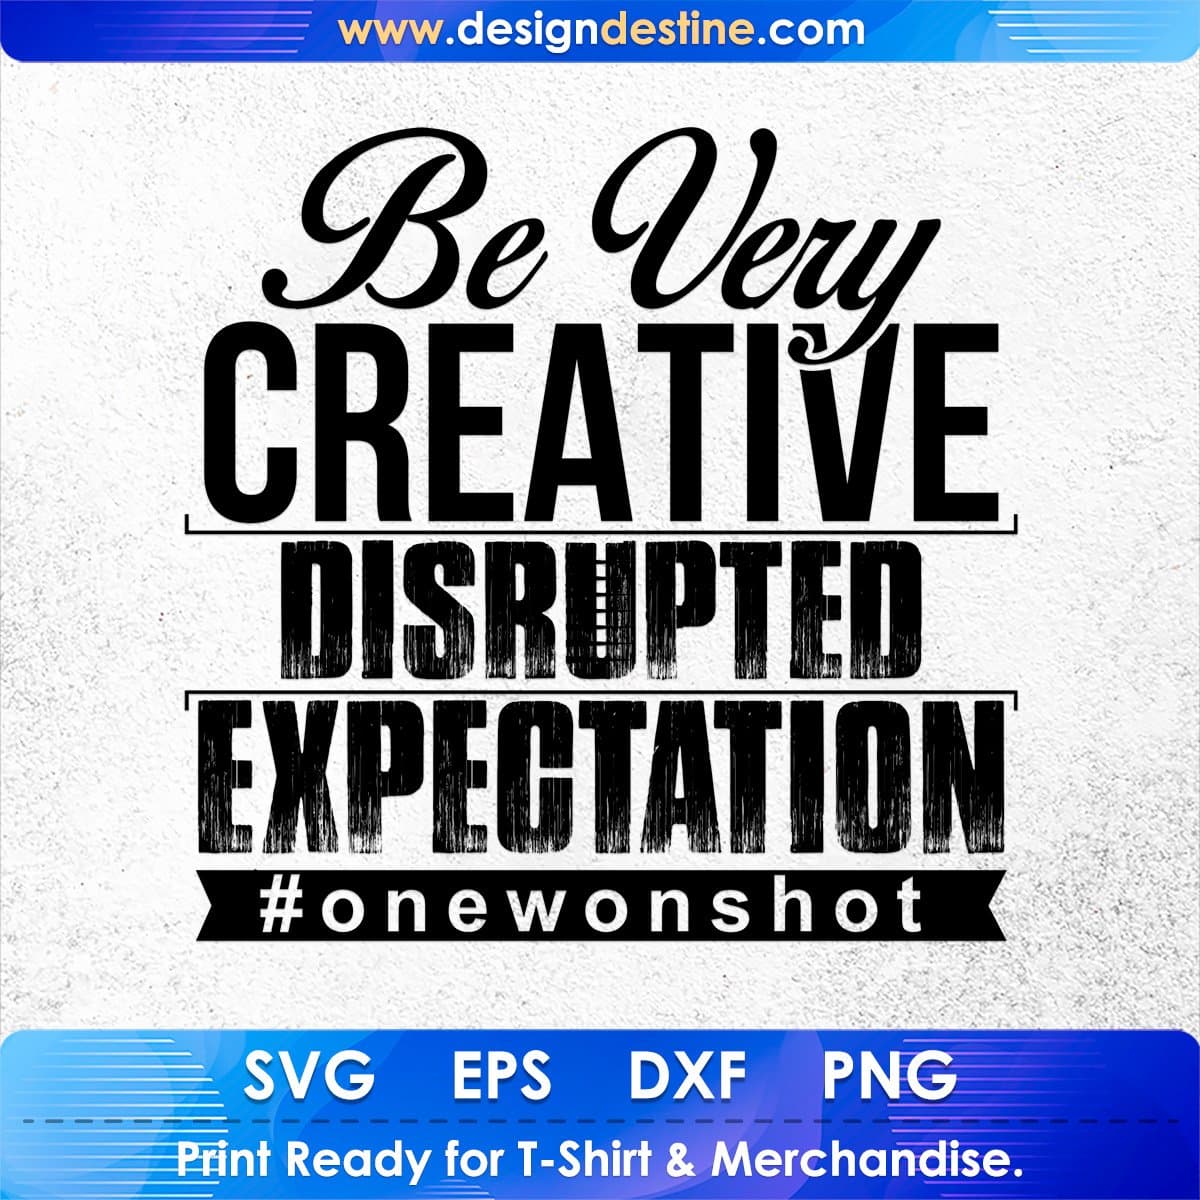 Be Very Creative Disrupted Expectation T shirt Design In Svg Cutting Printable Files